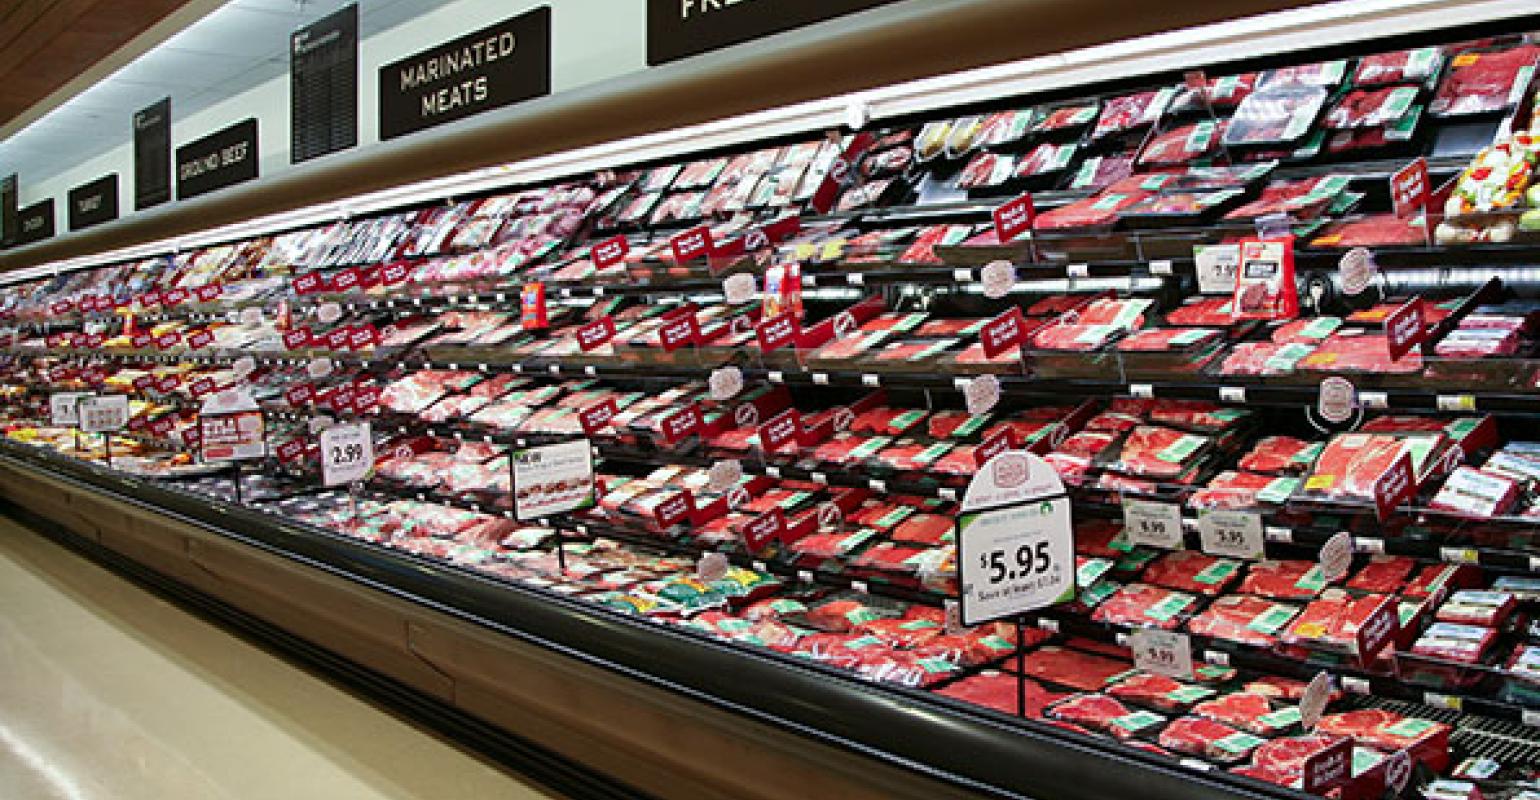 Technology and customer-centric strategies transform meat department into  destination